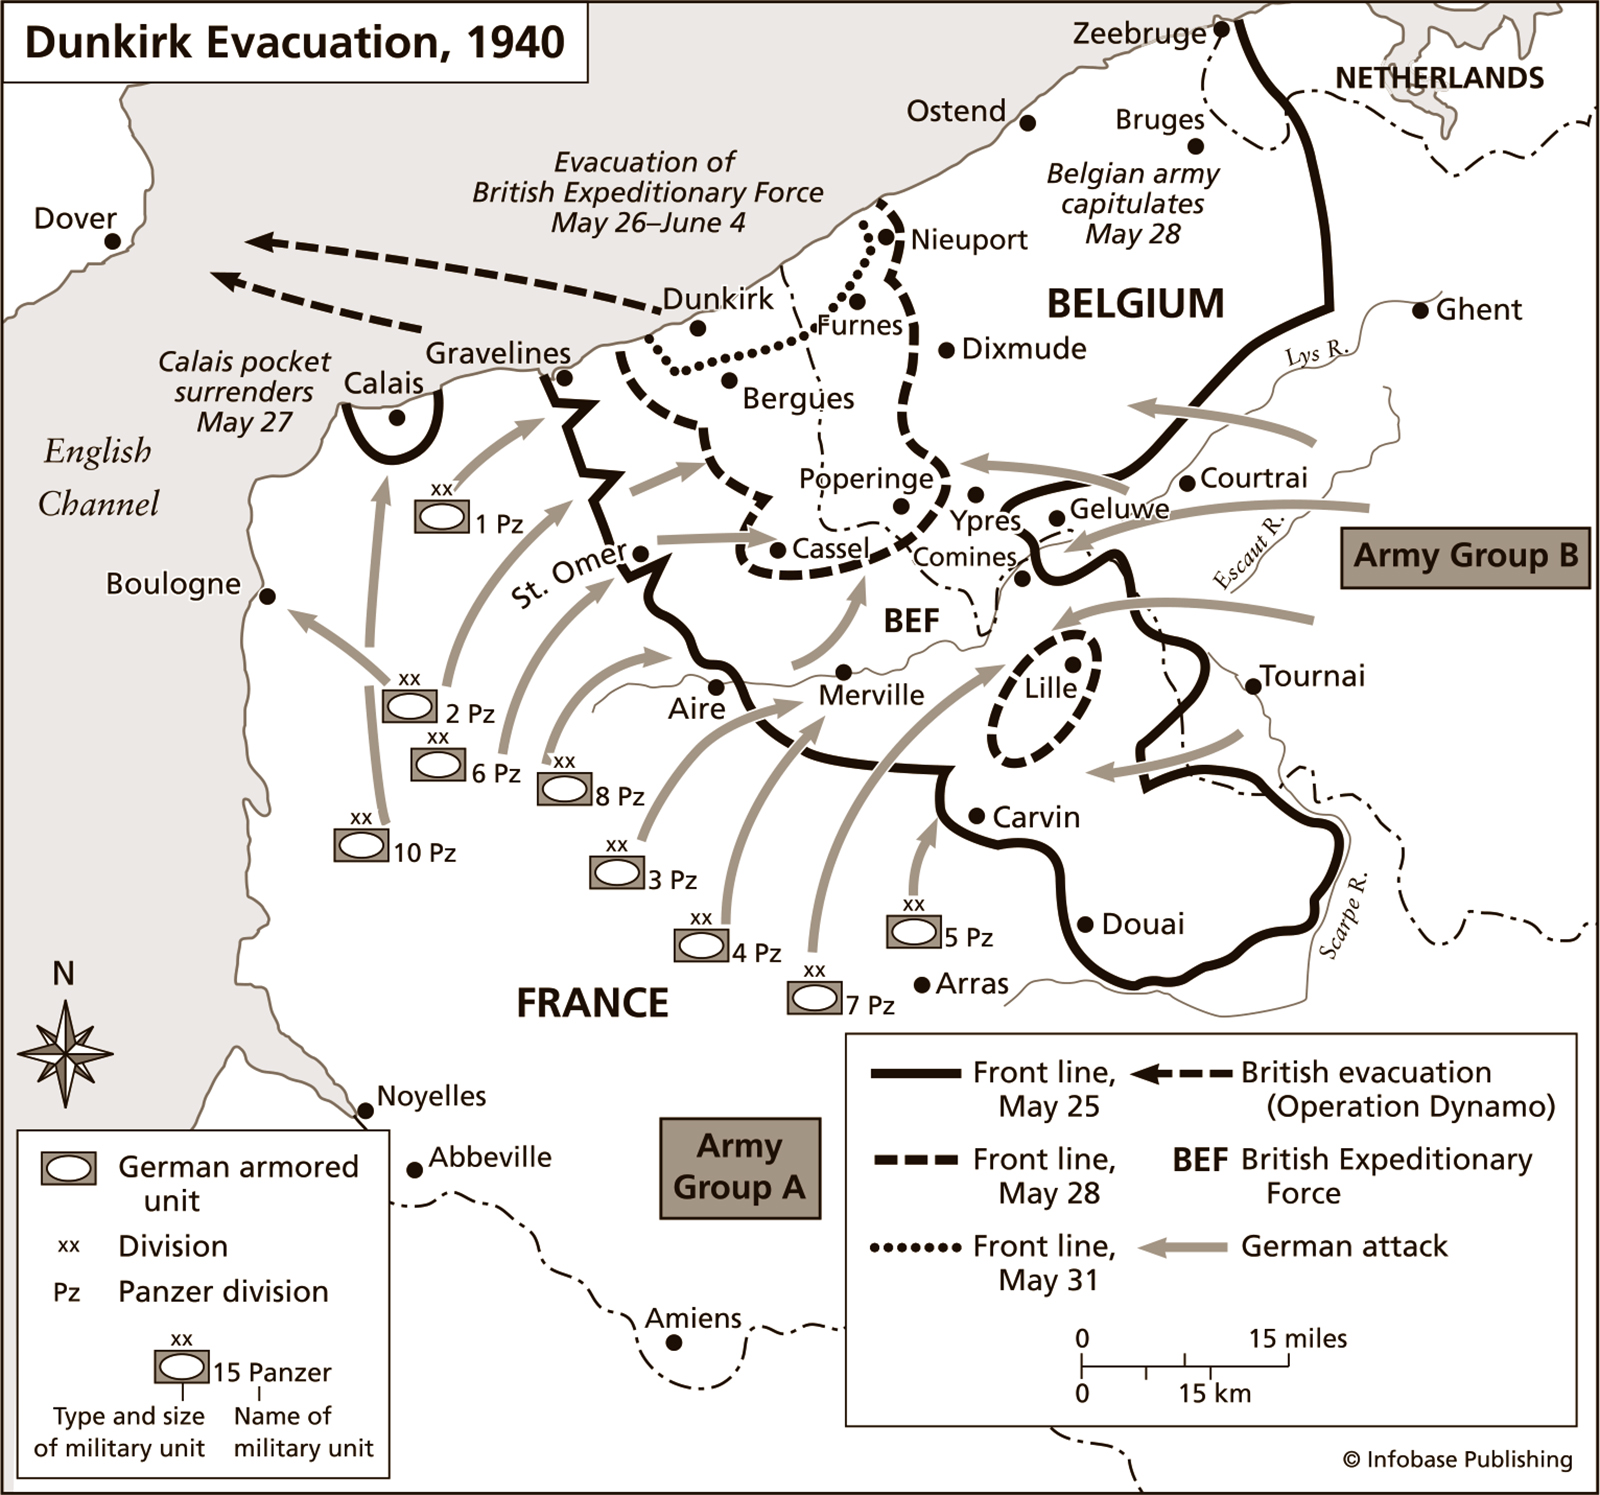 A detailed strategic map illustrating the Dunkirk Evacuation in 1940, showing the positions and movements of German armored units, divisions, and the Panzer divisions, as well as the British Expeditionary Force's evacuation routes and front lines at various dates. Key locations in France and Belgium are marked, with symbols and lines indicating military units and front lines, alongside a legend for clarification.